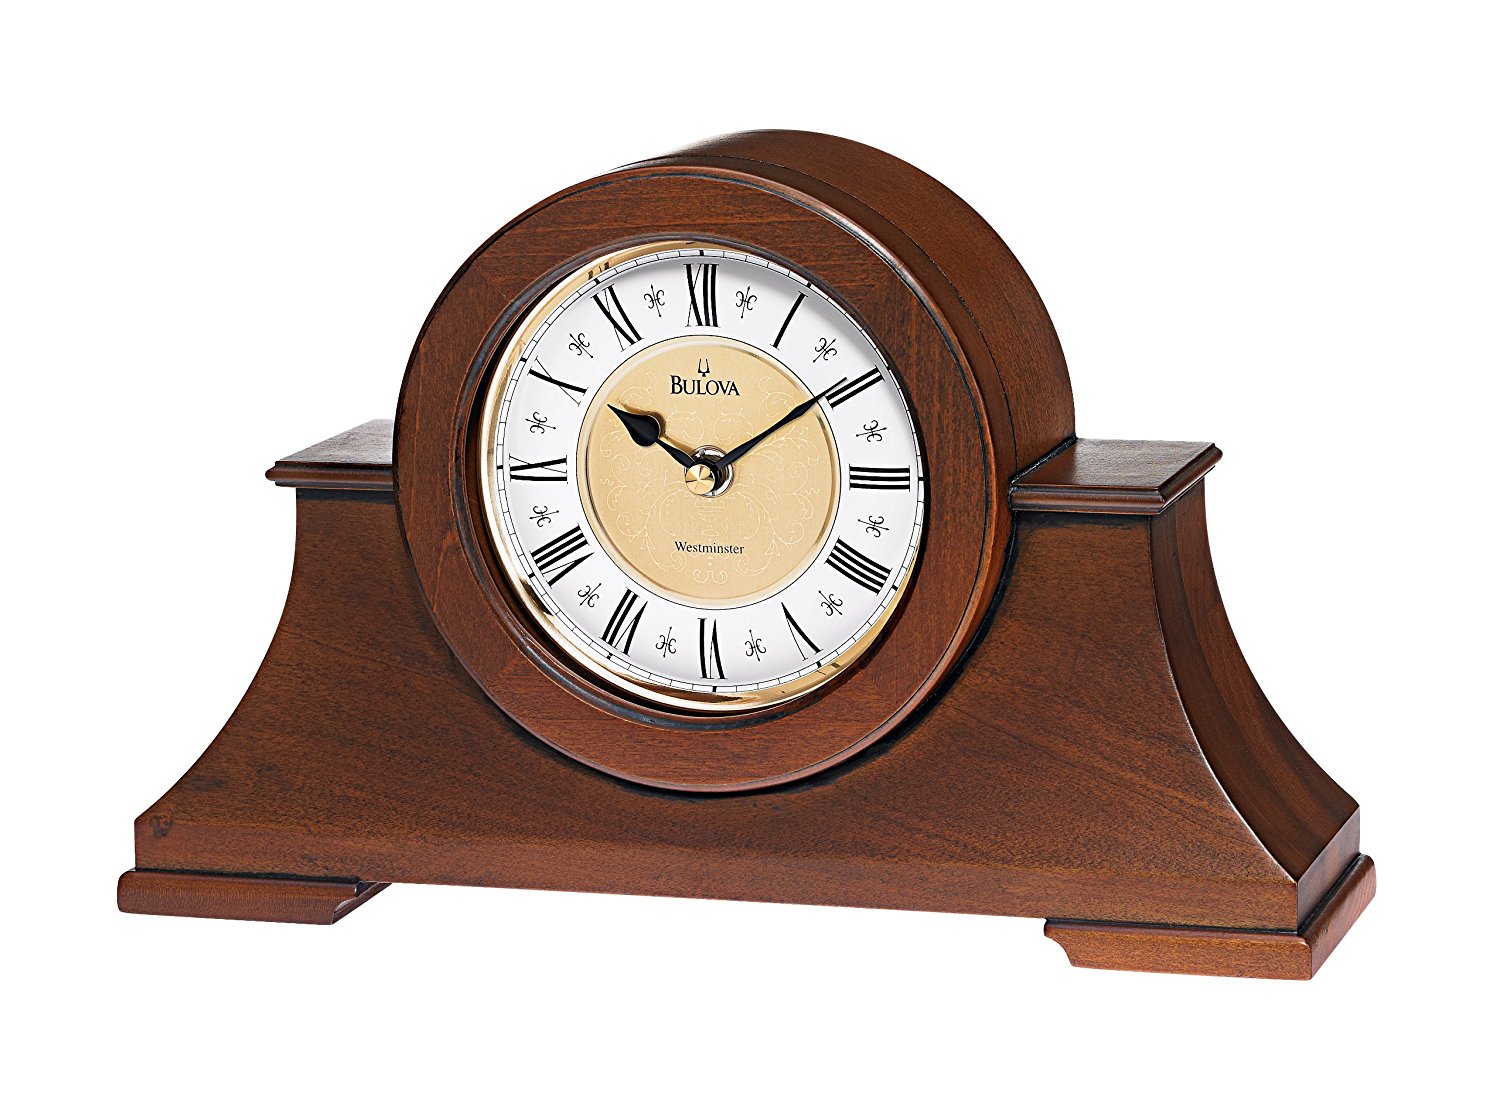 Cambria Mantel Clock with Westminster Chime